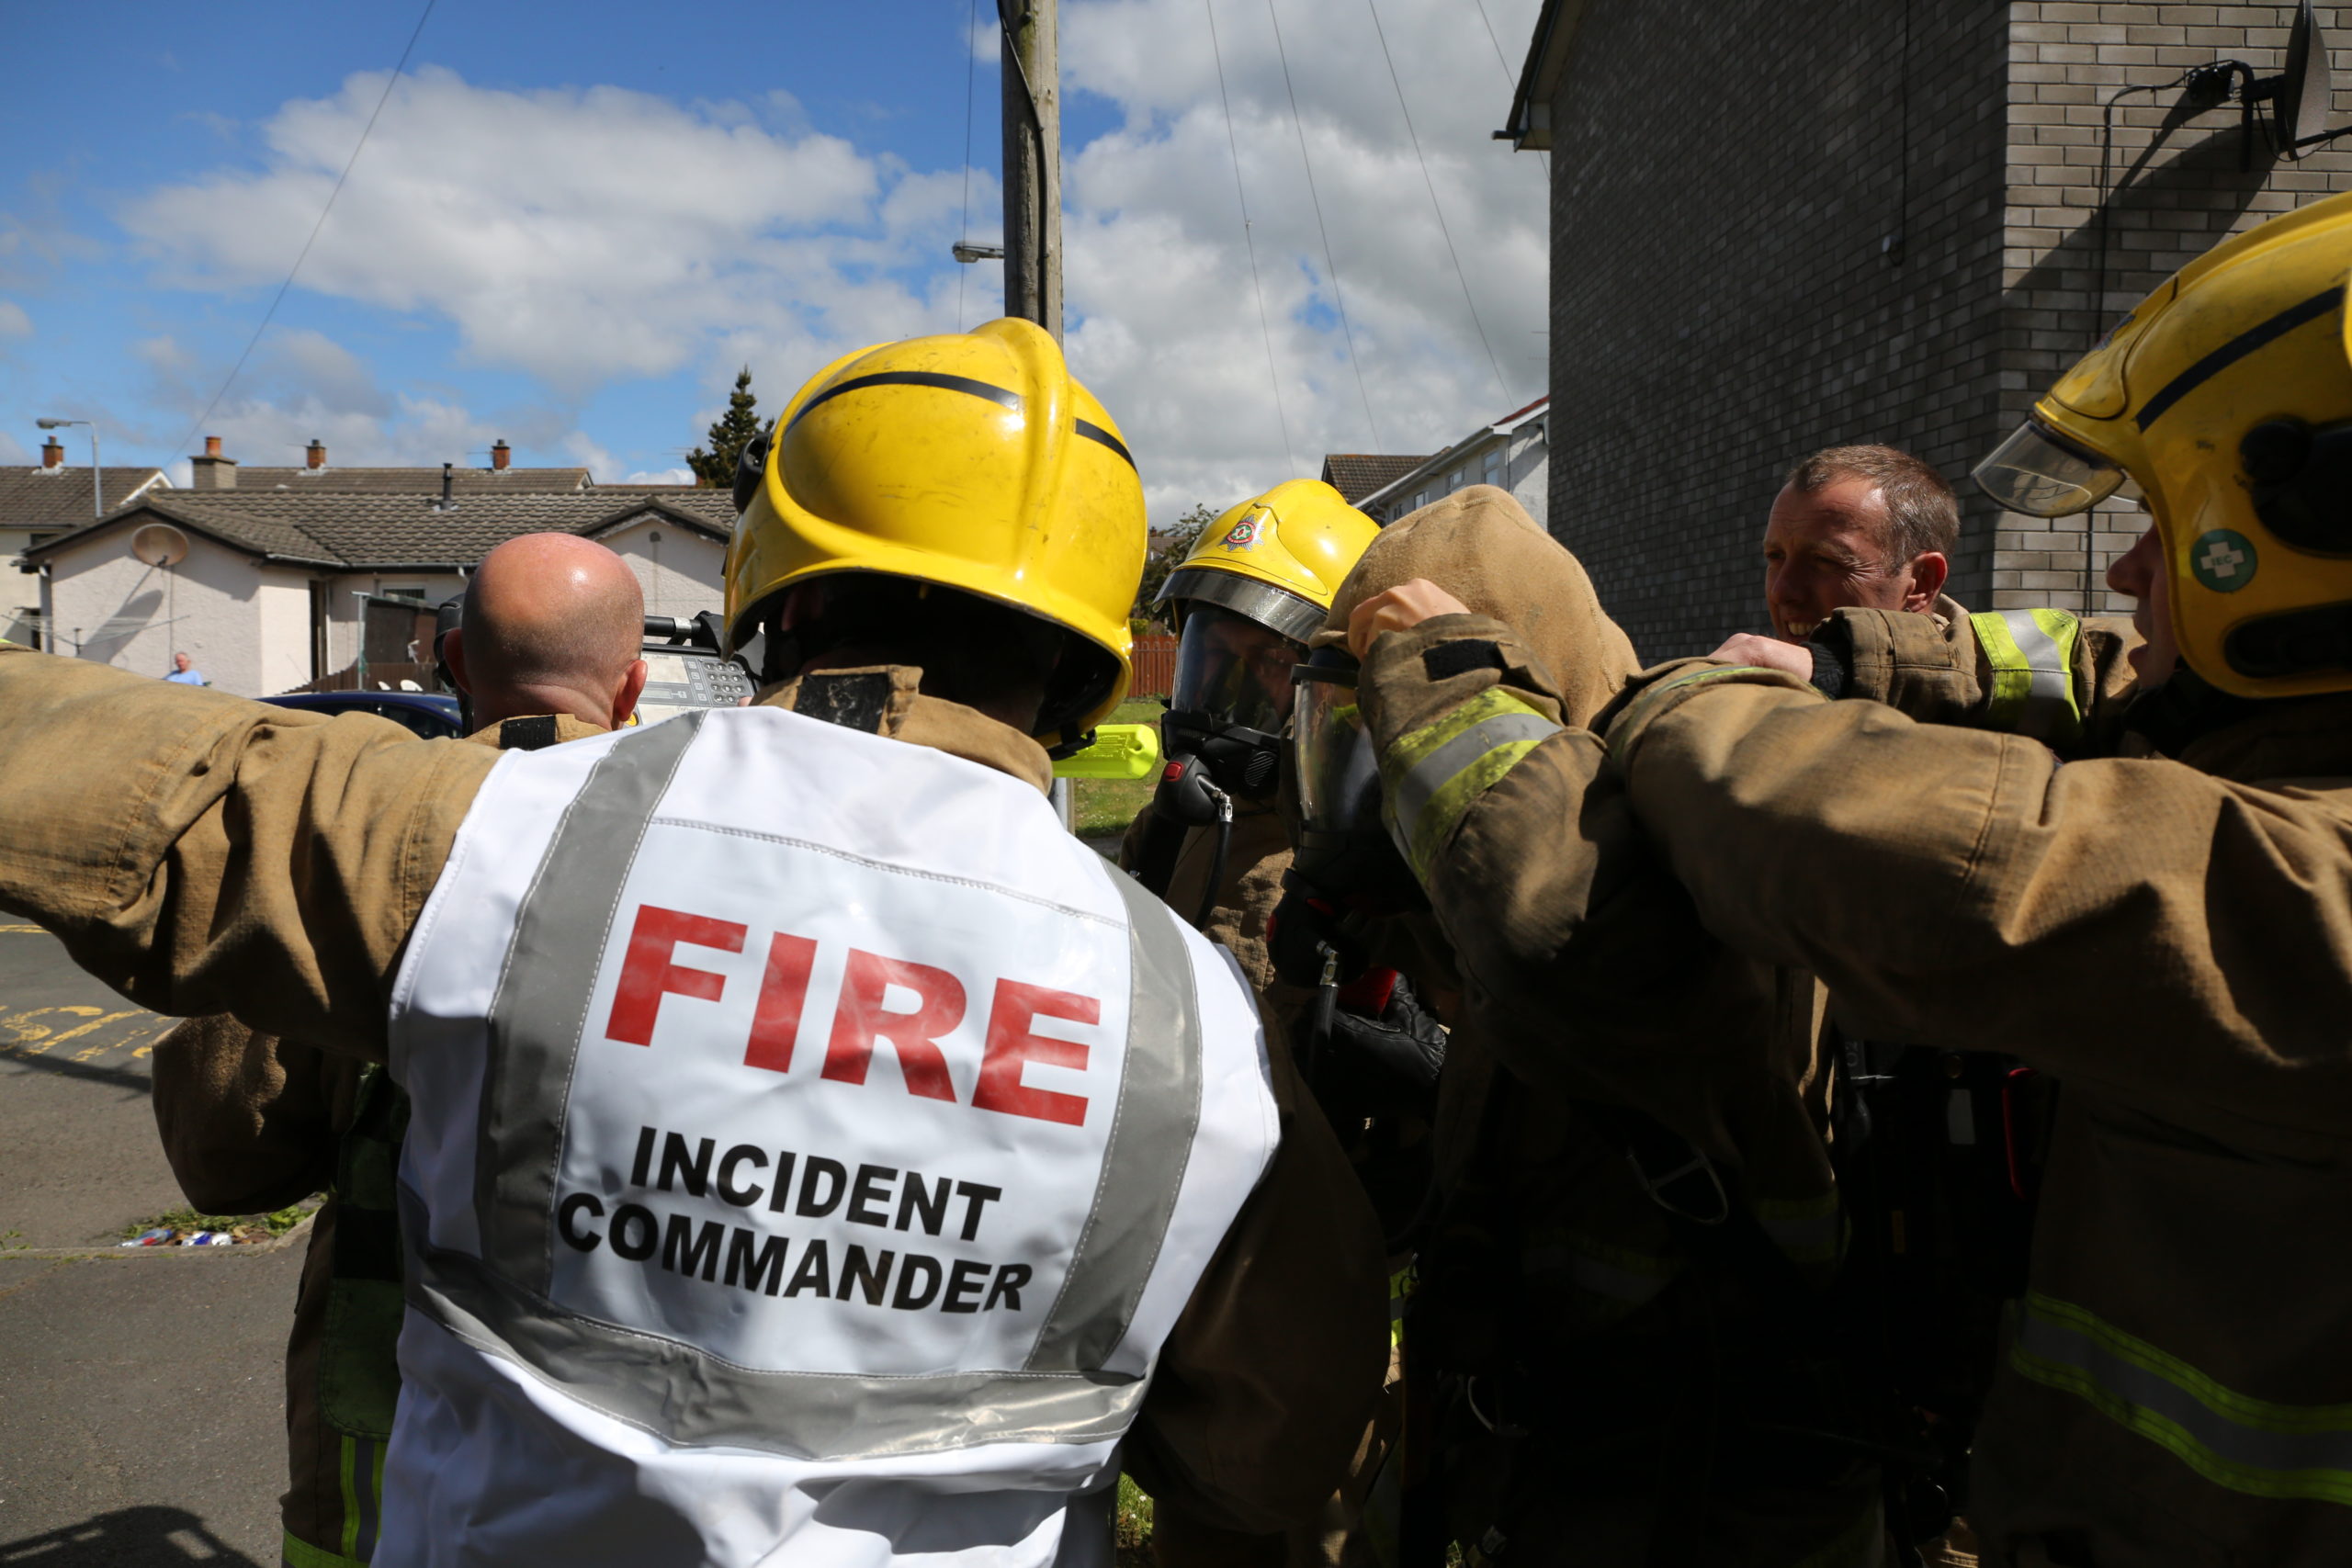 Firefighters and Incident Commander at an incident.